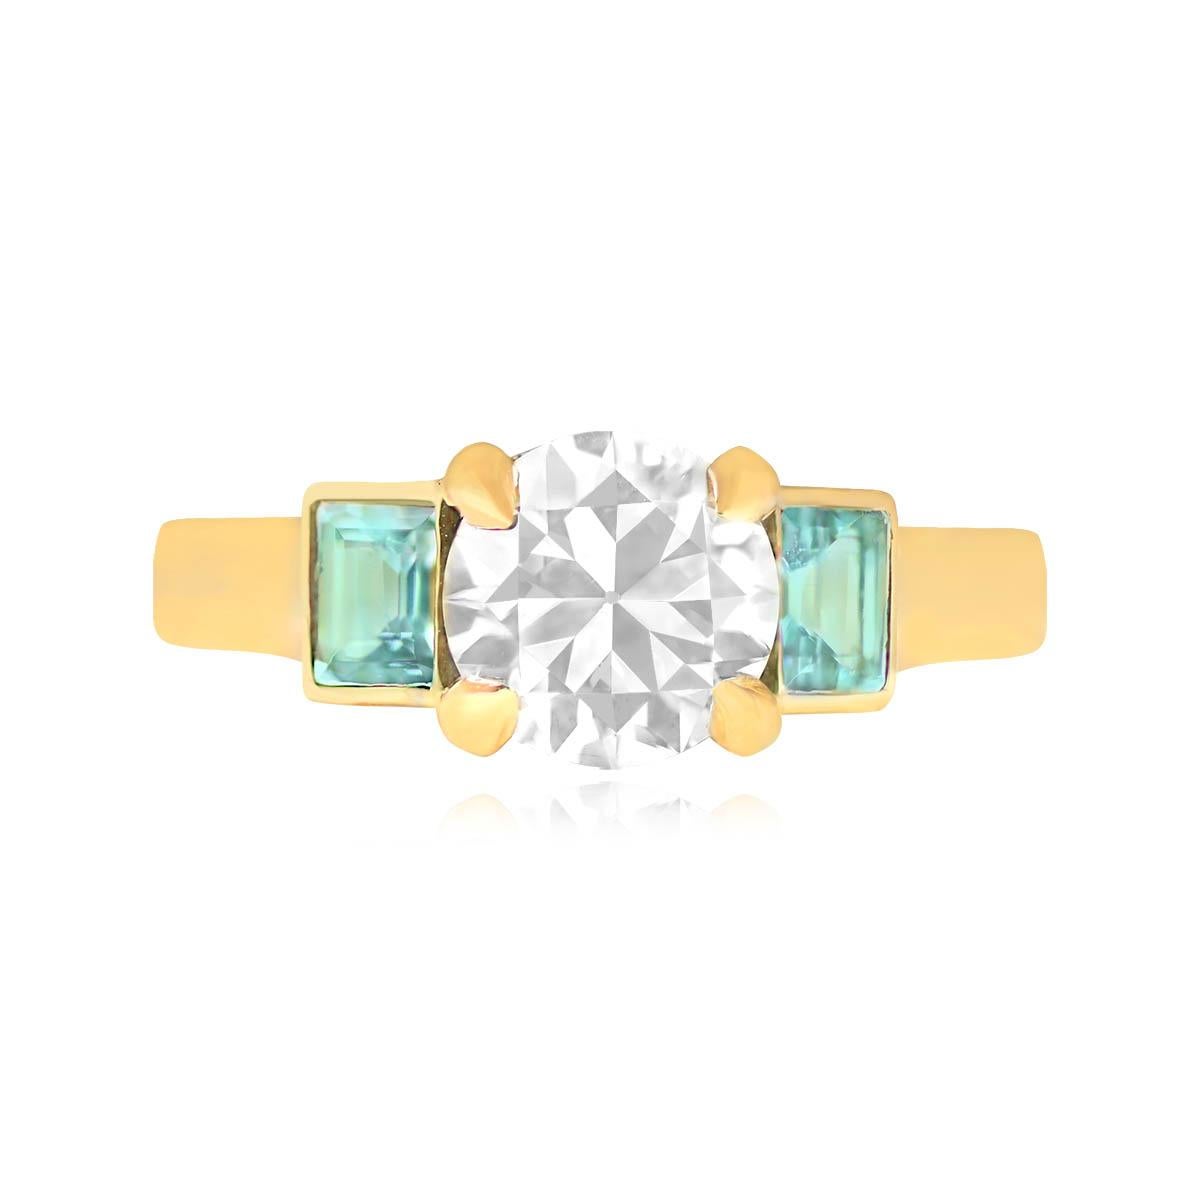 Striking ring highlighting a GIA-certified, prong-set 1.54-carat old European cut diamond at the center, boasting K color and VS2 clarity. The shoulders are adorned with two bezel-set baguette-cut aquamarines, adding a touch of elegance. Crafted